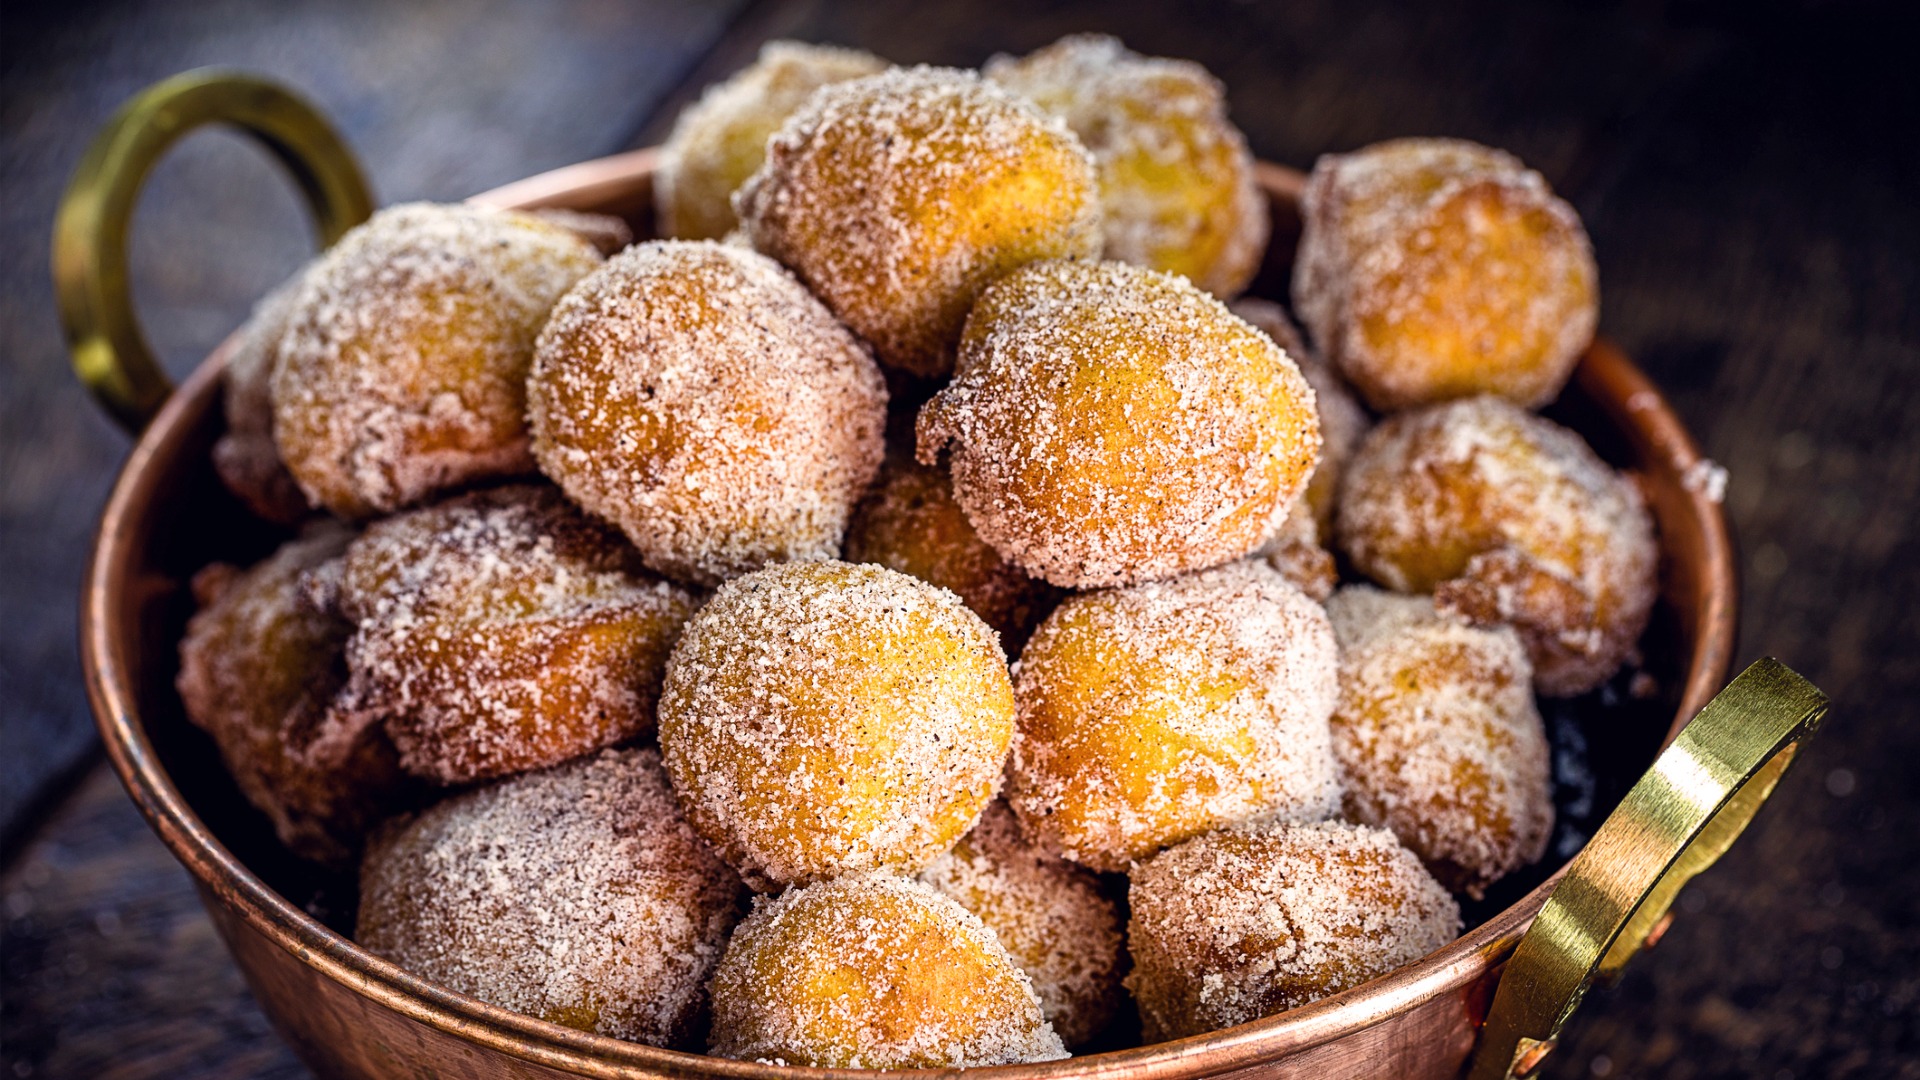 This is a close-up of a bowl filled with fritule - round dough balls covered in sugar and cinnamon.